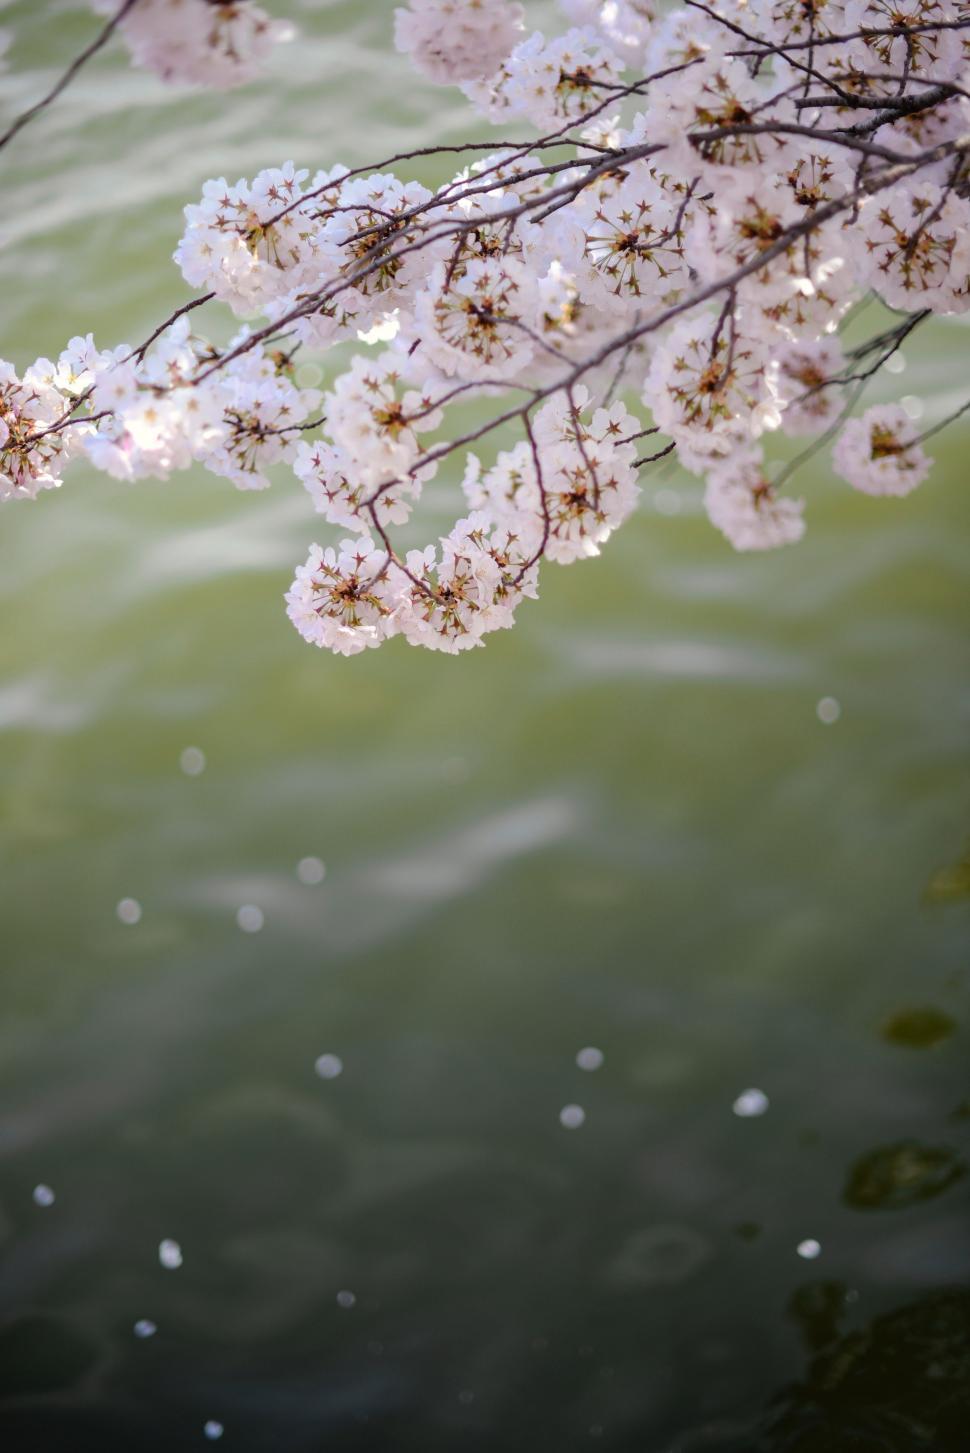 Free Image of Flowers Near Water 